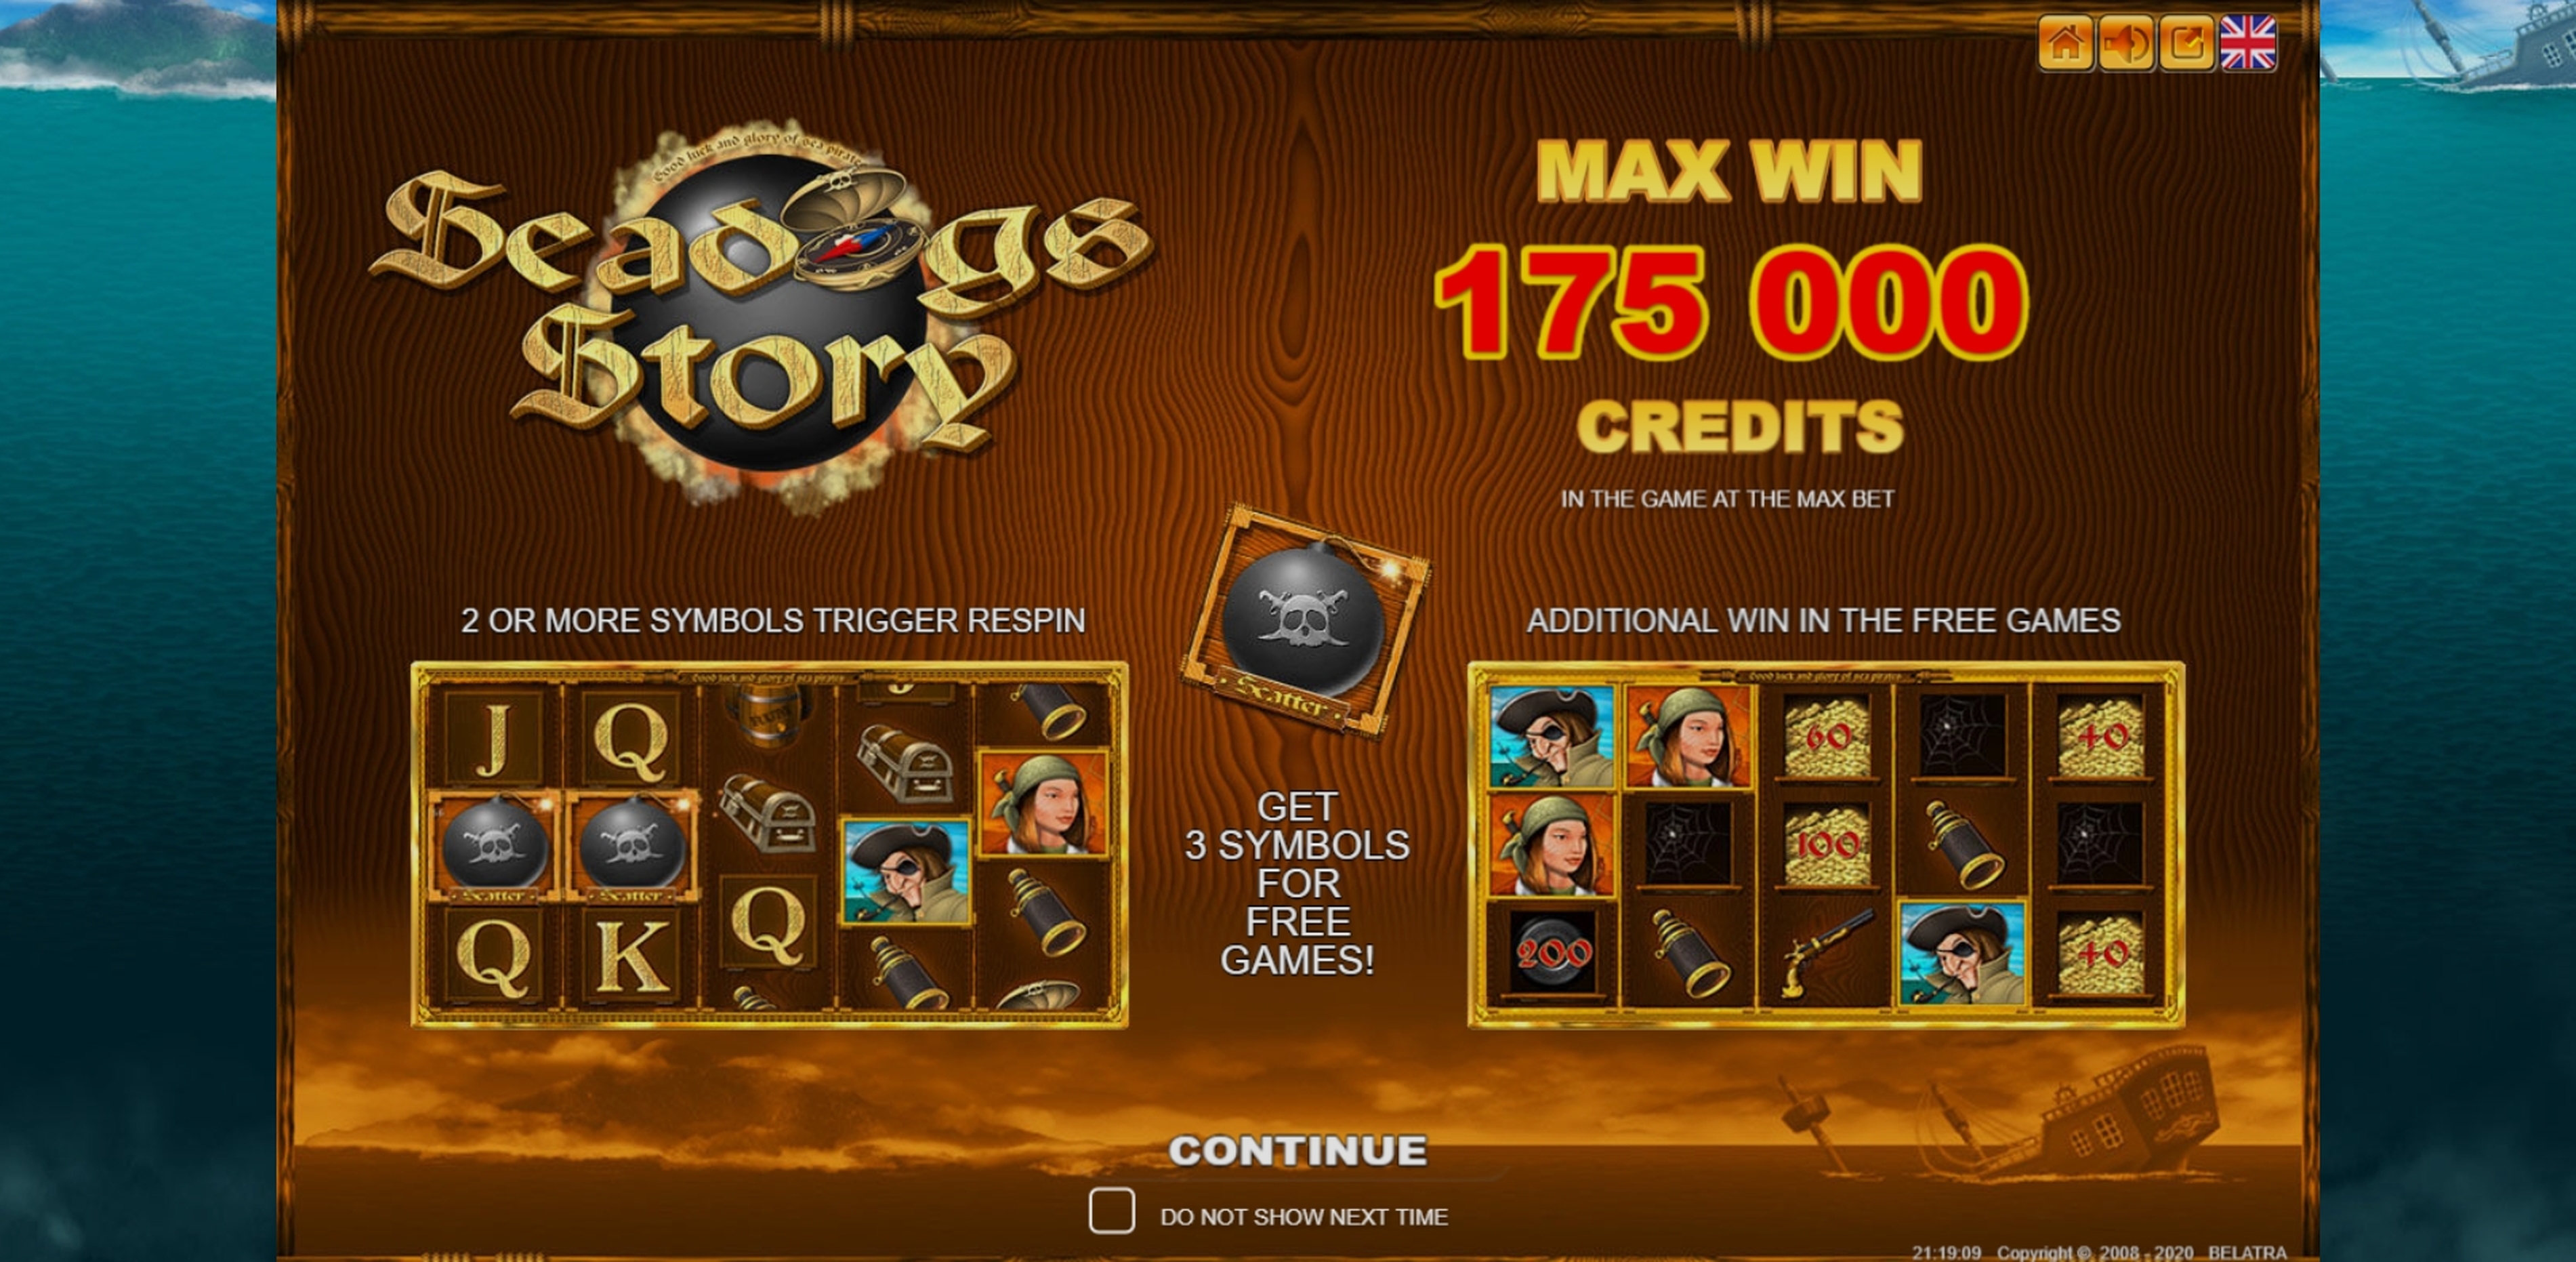 Play Seadogs Story Free Casino Slot Game by Belatra Games